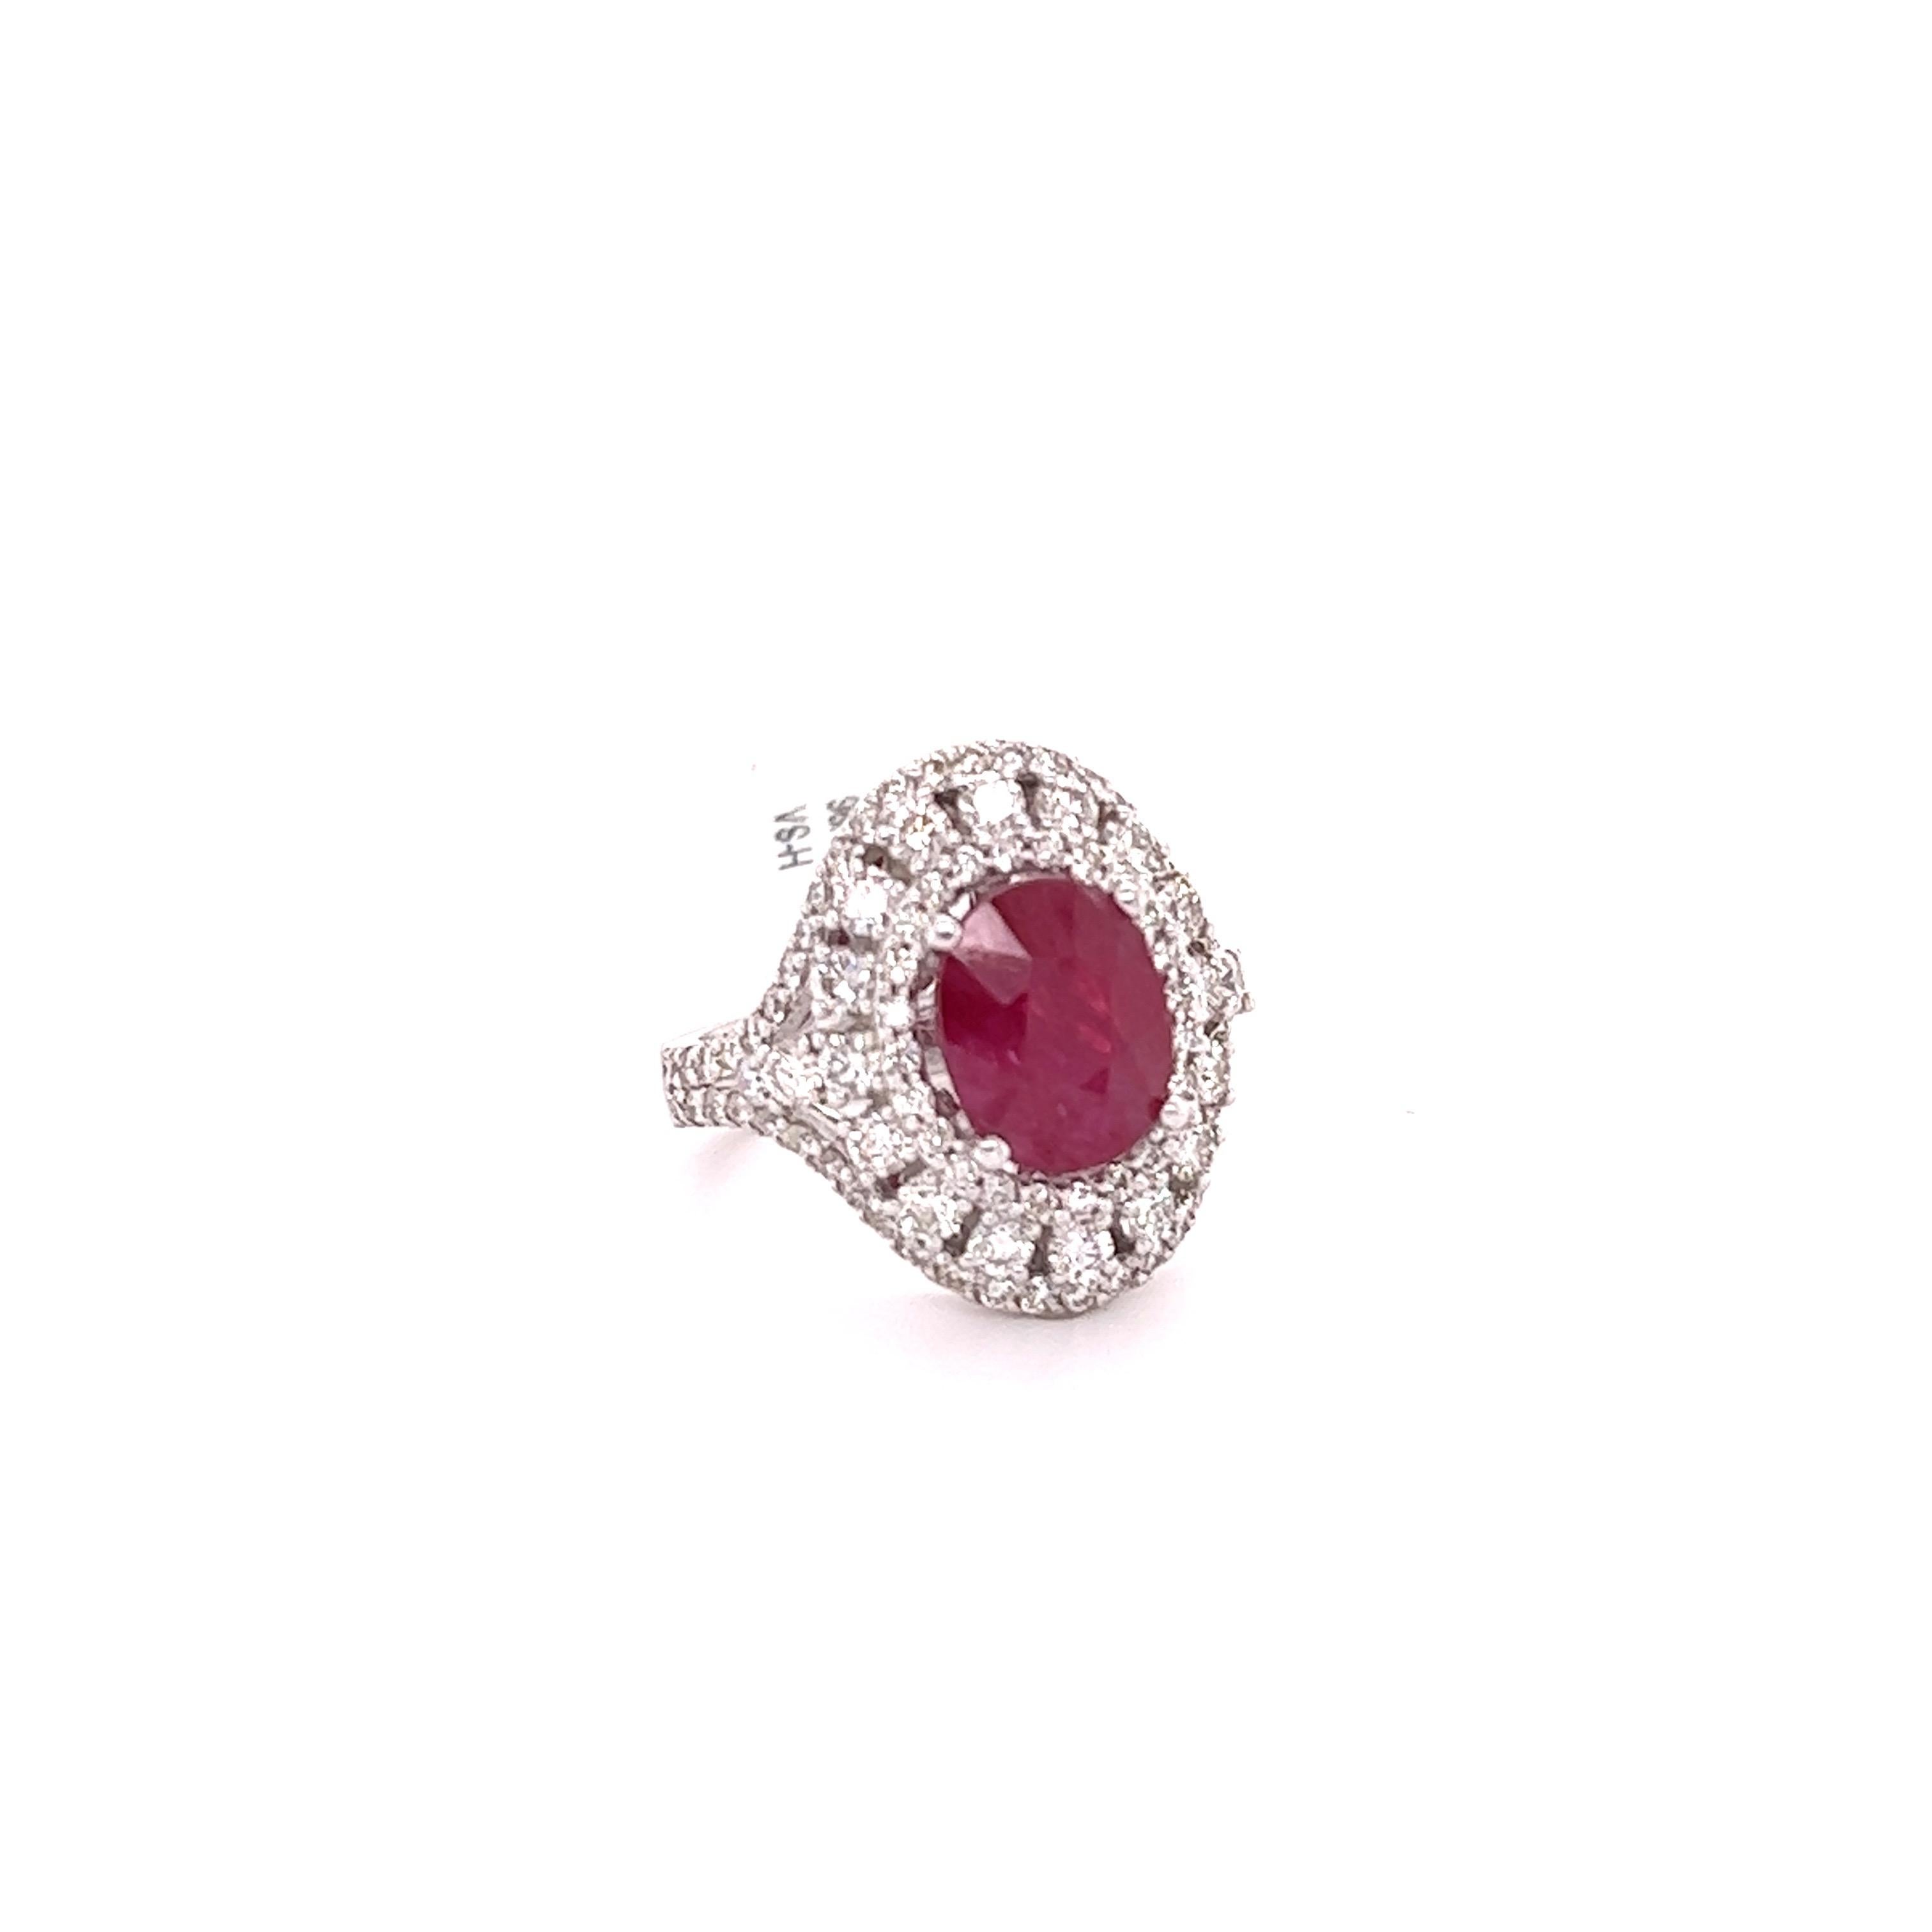 This ring has a beautiful Oval Cut Natural Ruby that weighs 3.97 Carats and is surrounded by 98 Round Cut Diamonds that weighs 1.80 Carats. (Clarity: VS, Color: H) The total carat weight of the ring is 5.77 carats. 

Curated in 14 Karat White Gold